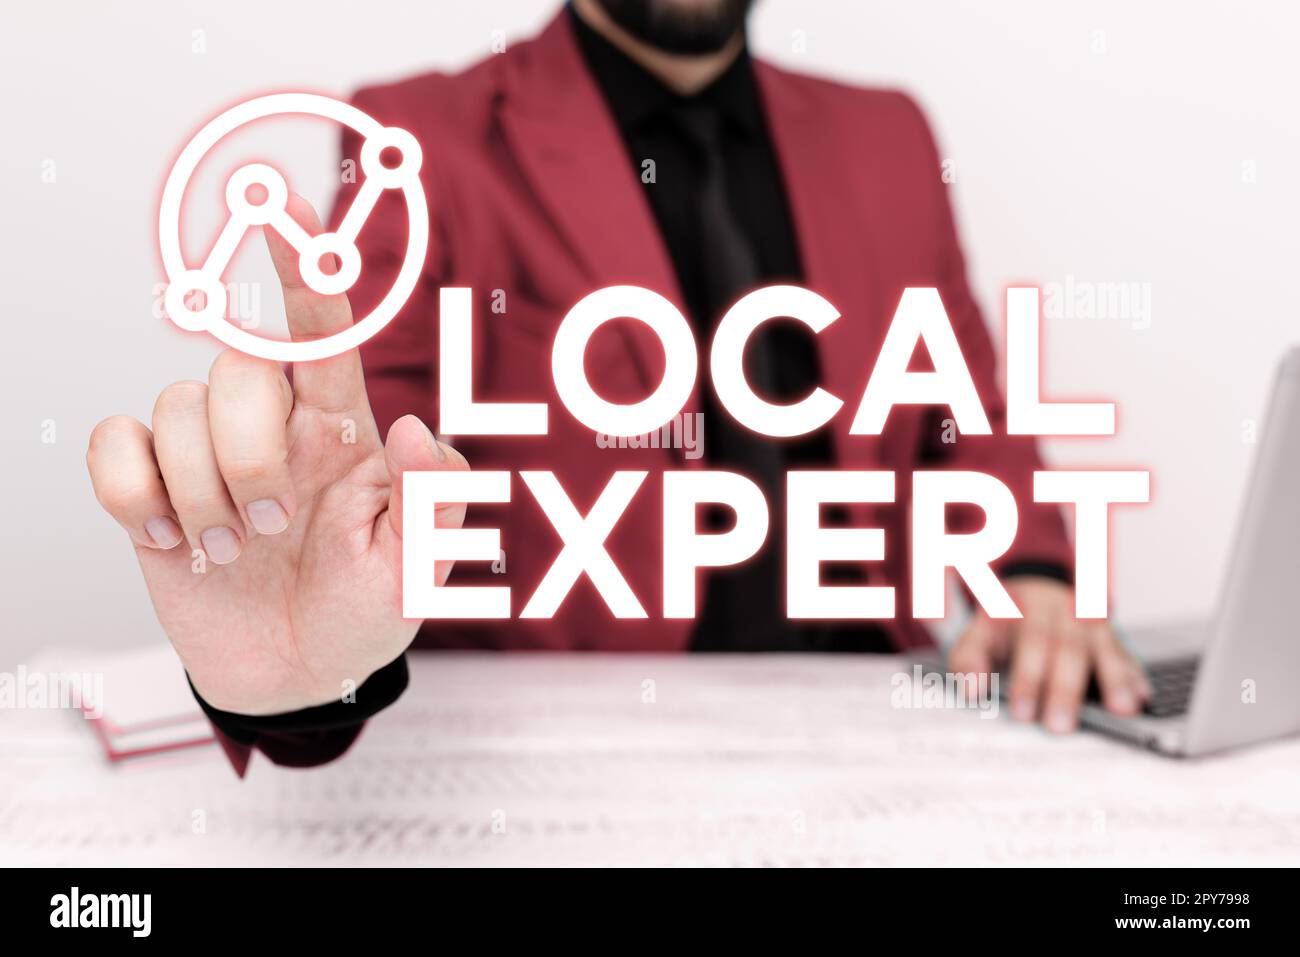 Sign displaying Local Expert. Word for offers expertise and assistance in booking events locally Stock Photo